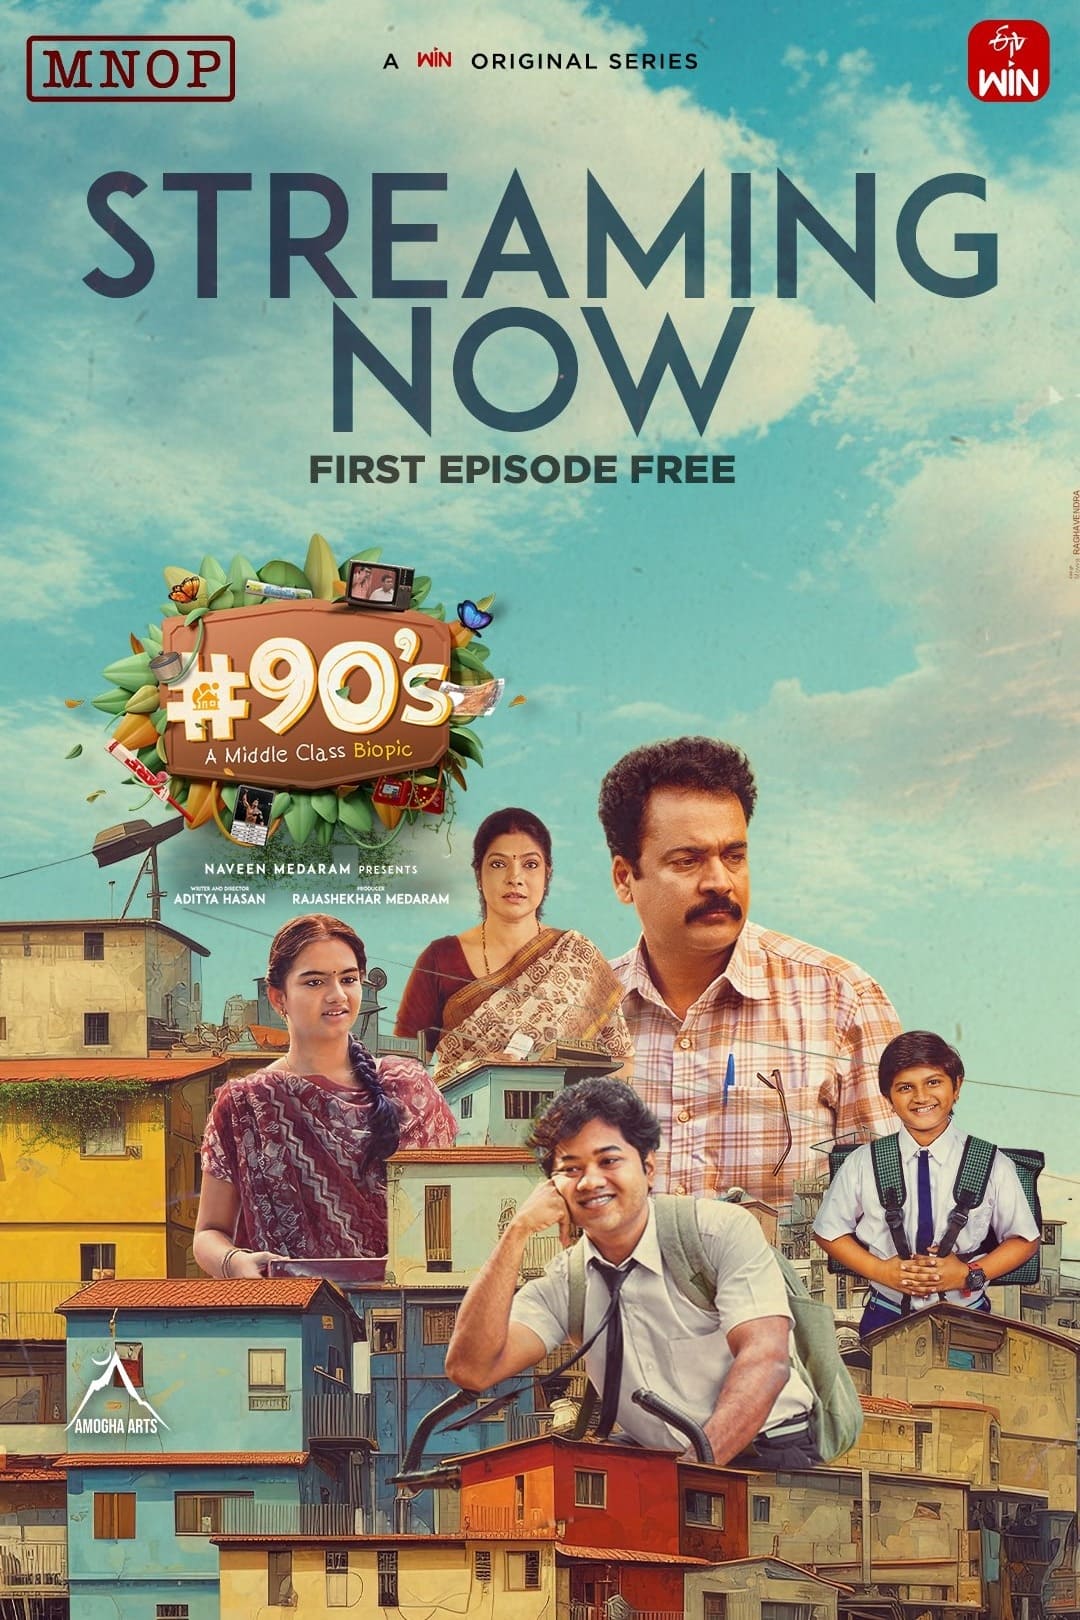 #90’s - A Middle Class Biopic